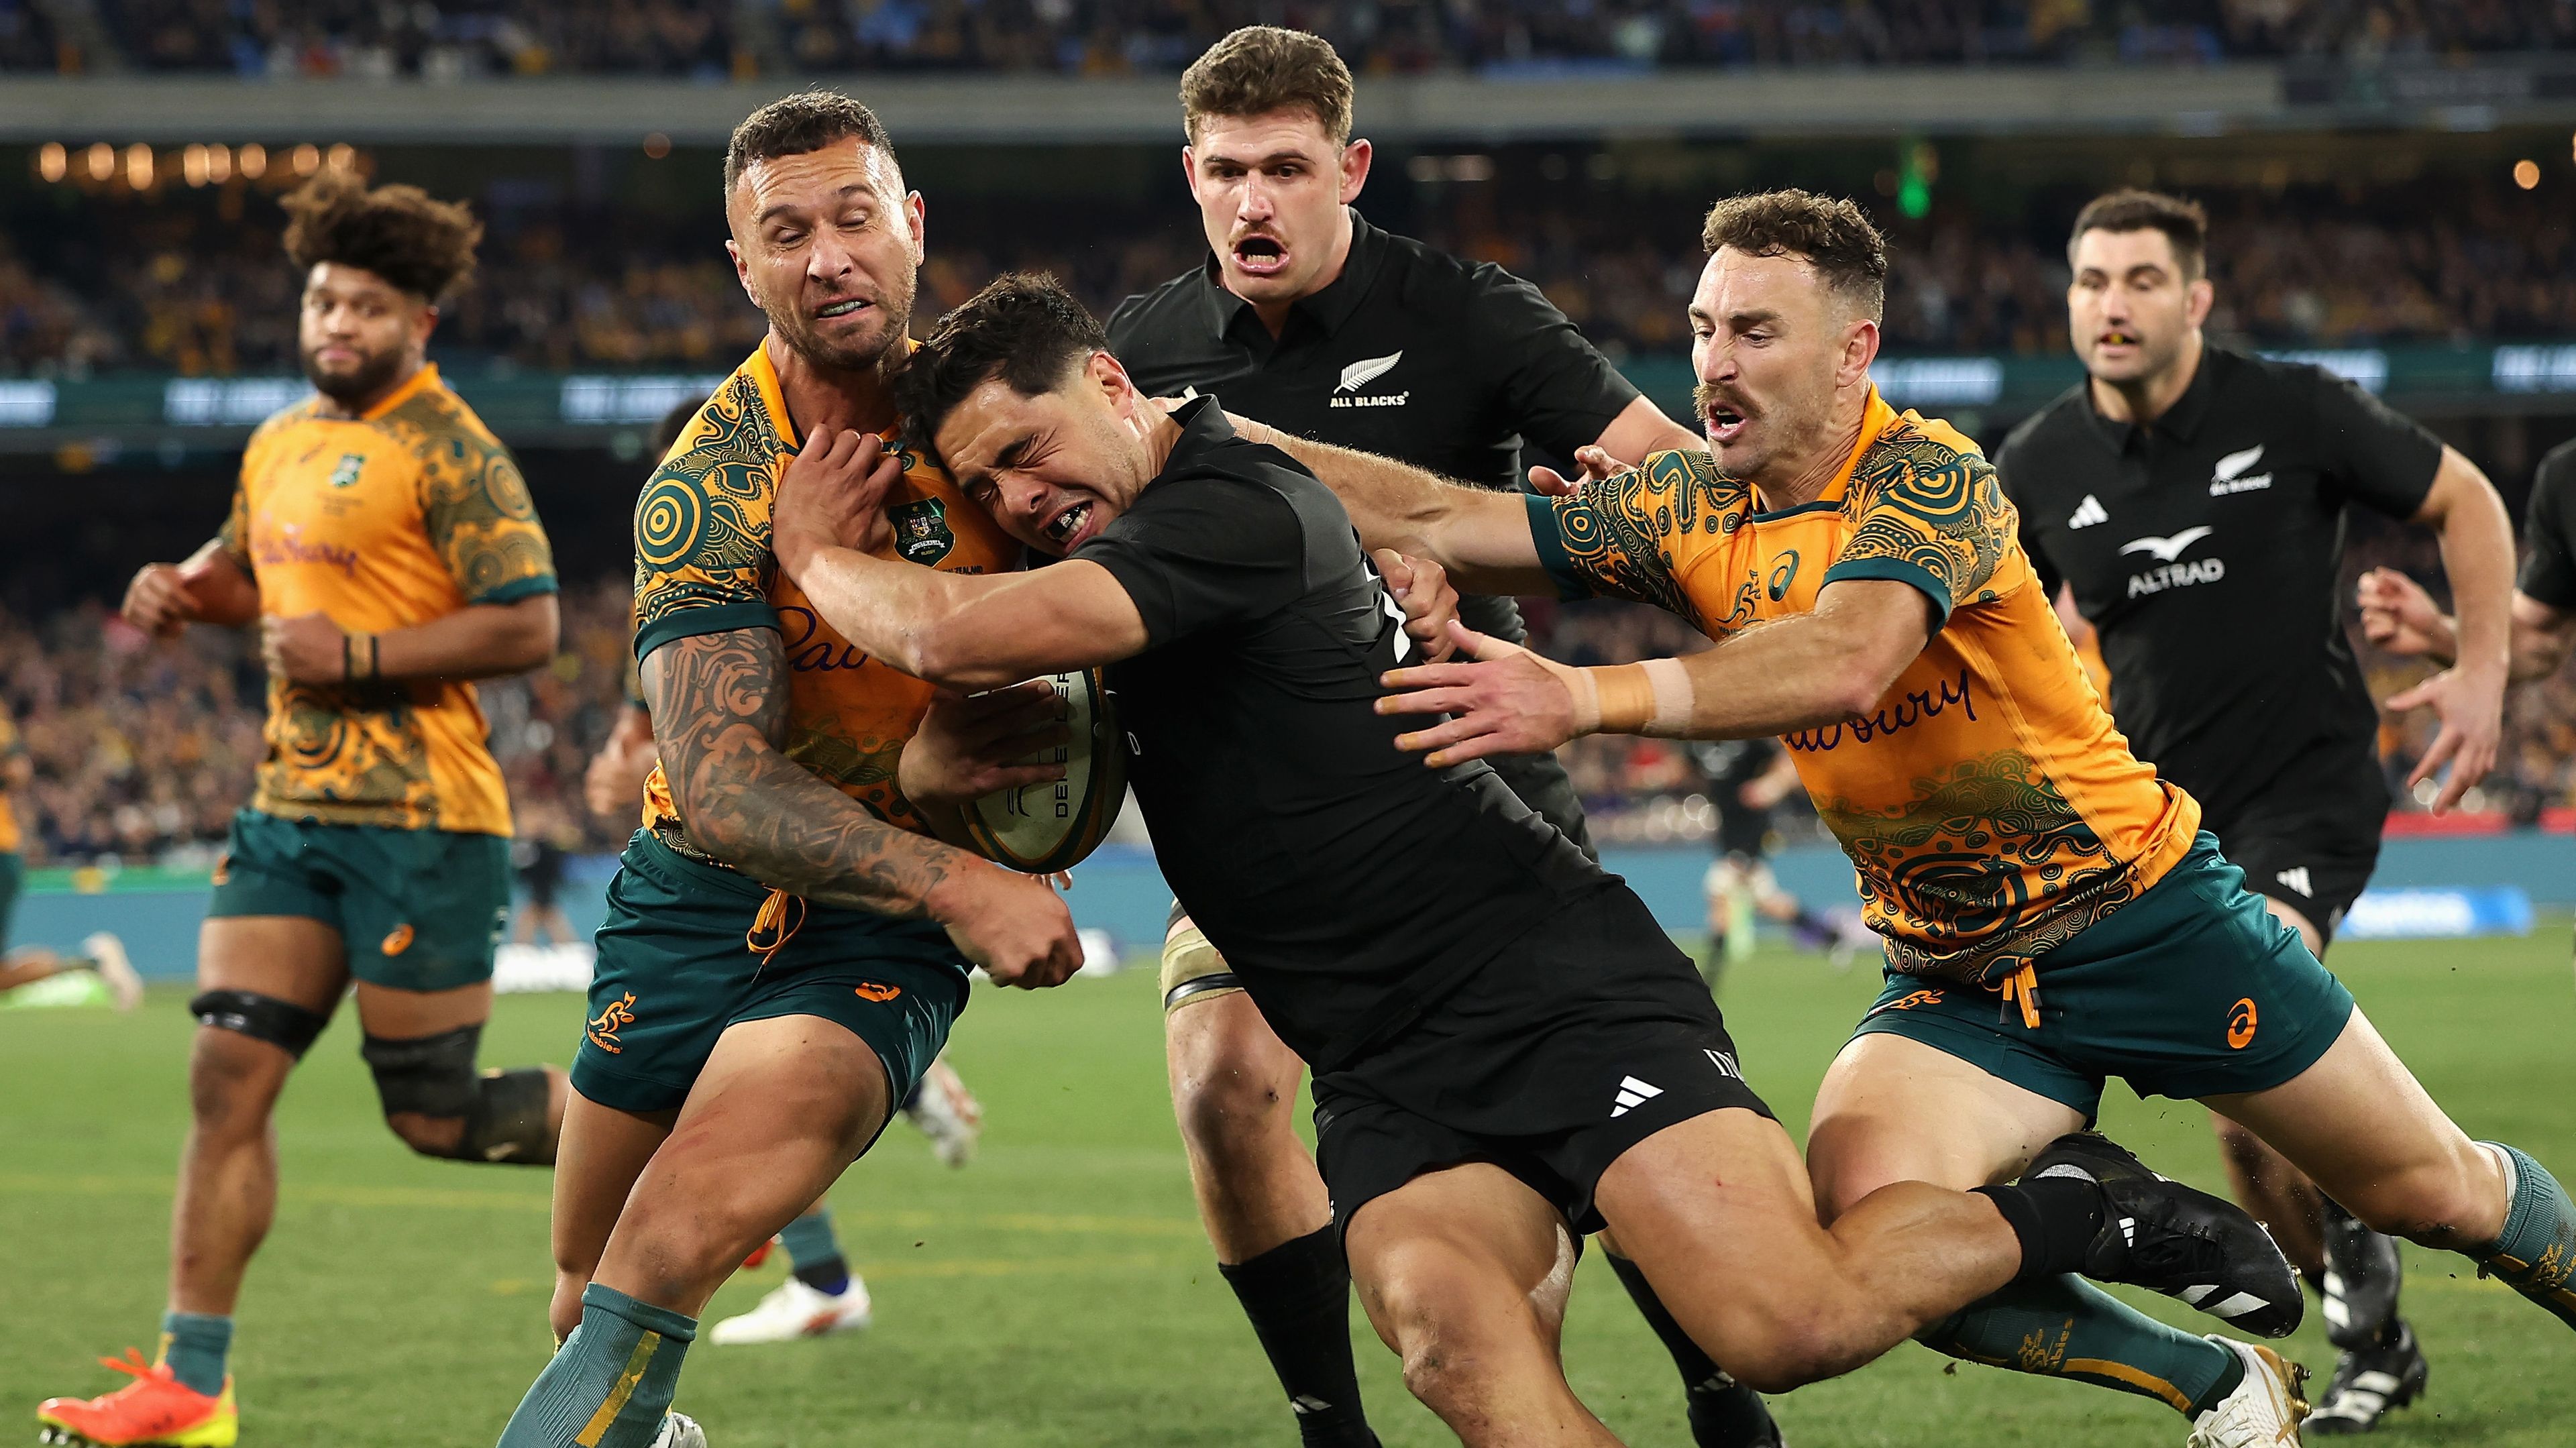 Anton Lienert-Brown of the All Blacks is tackled by Quade Cooper of the Wallabies during the Rugby Championship and Bledisloe Cup.